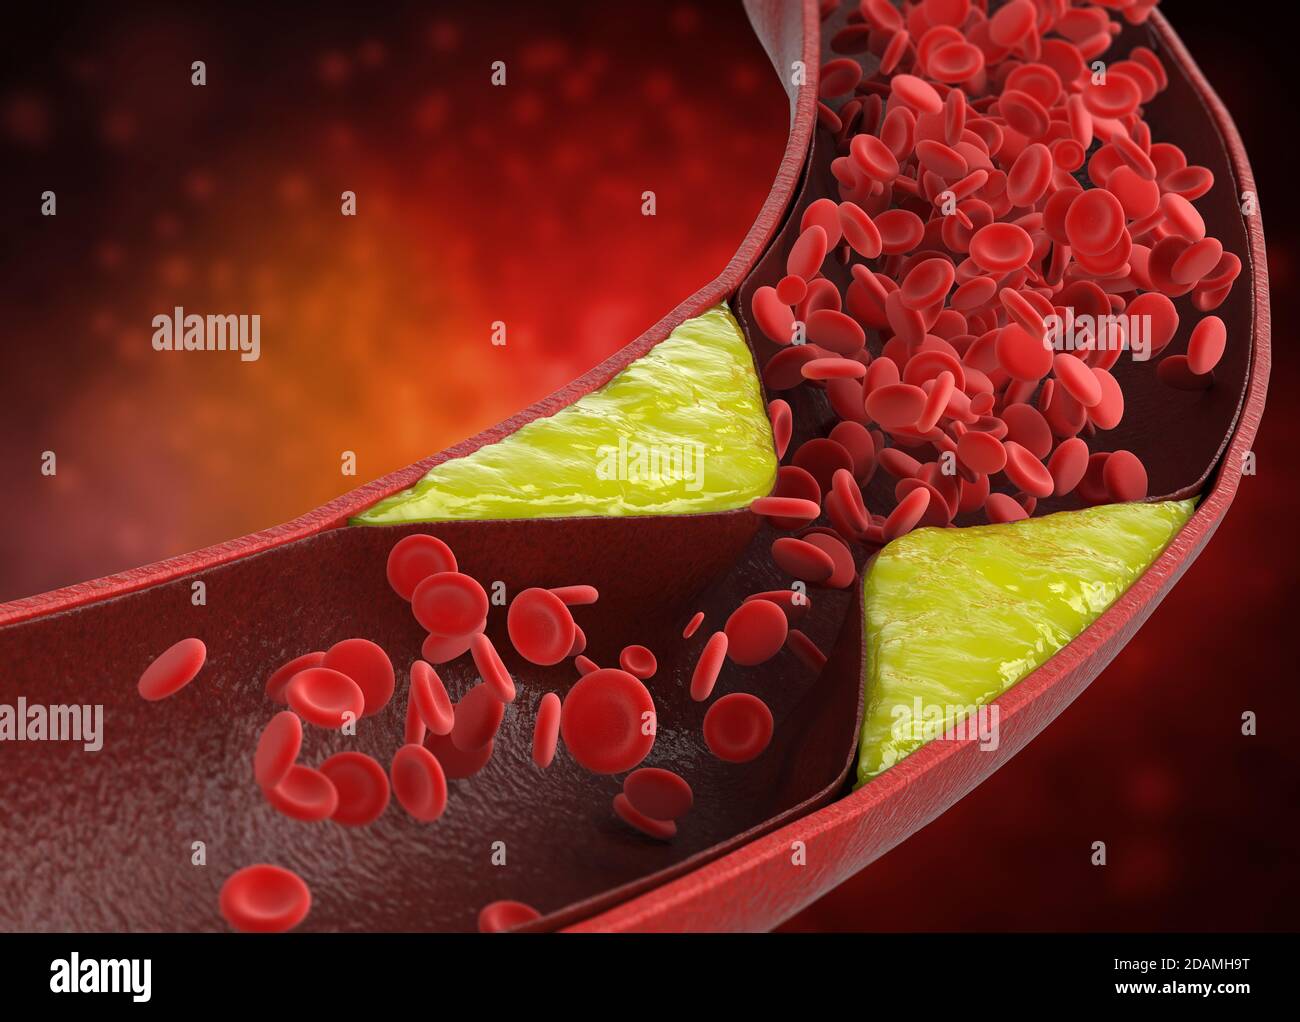 3d rendering atherosclerosis with cholesterol blood or plaque in vessel cause of coronary artery disease Stock Photo